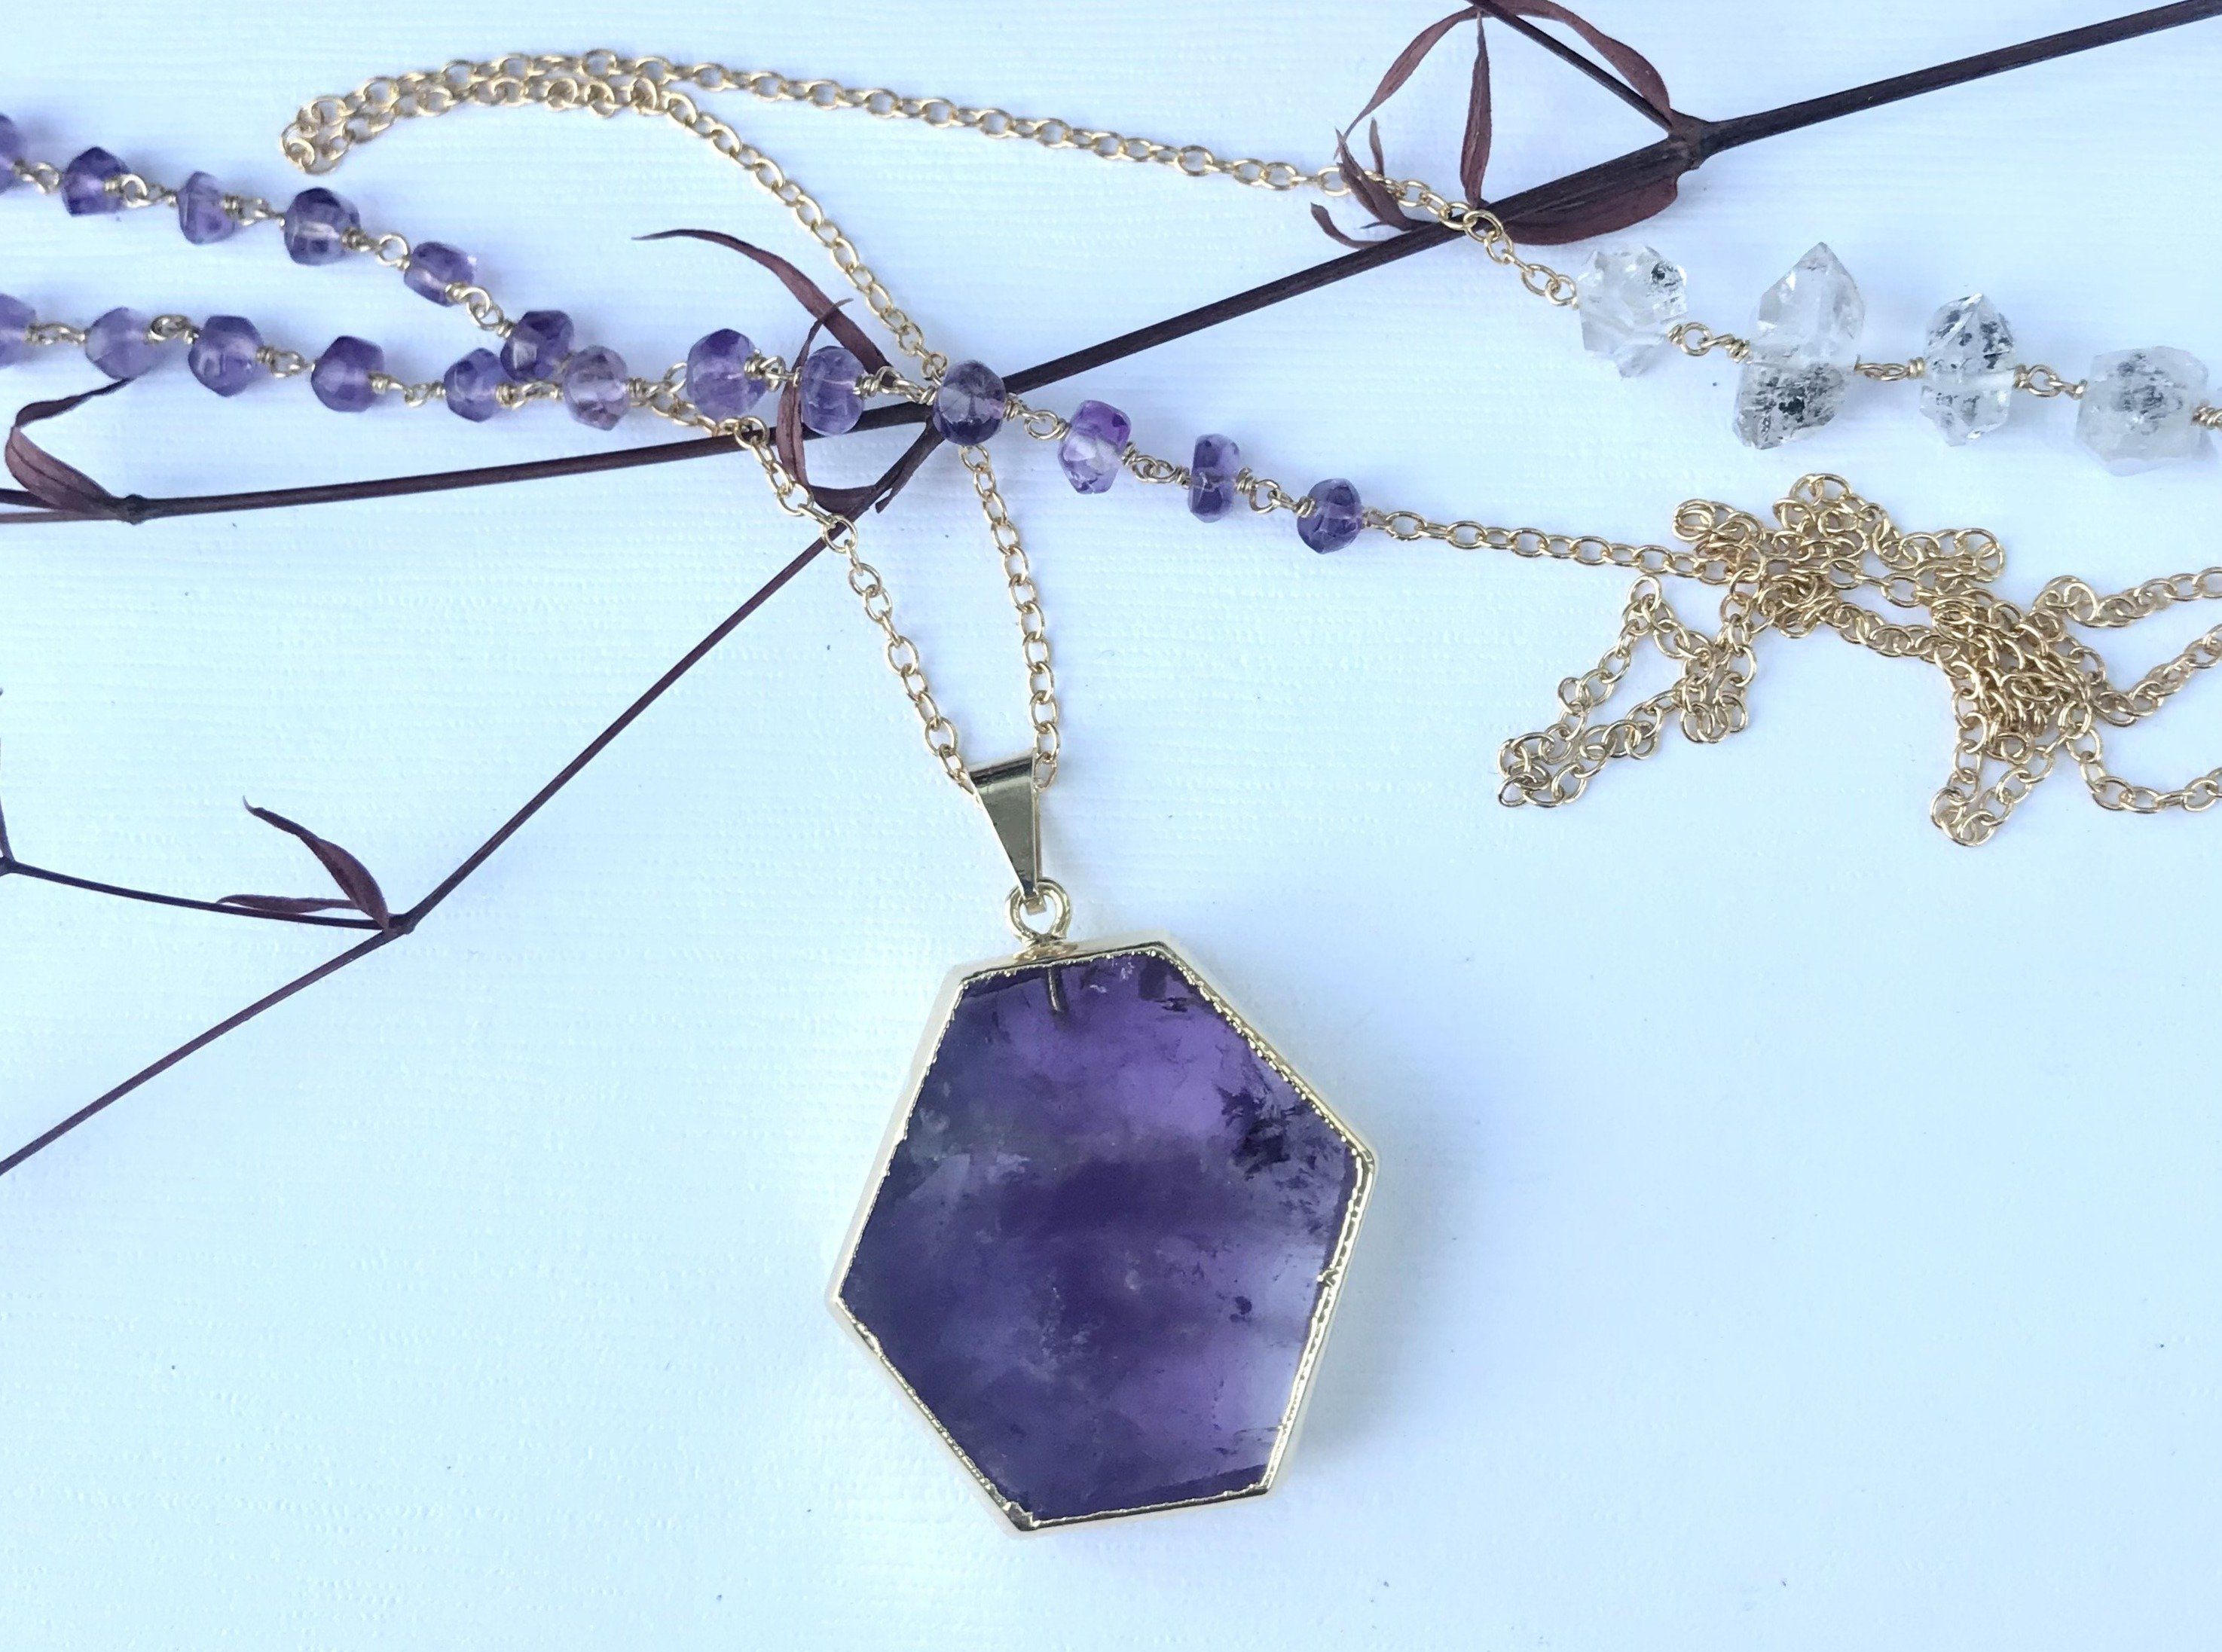 Raw Amethyst Necklace for Women Large Amethyst Pendant Necklace Rose Gold  Amethyst Jewelry Real Amethyst Pendulum Purple Crystal Necklace - Etsy